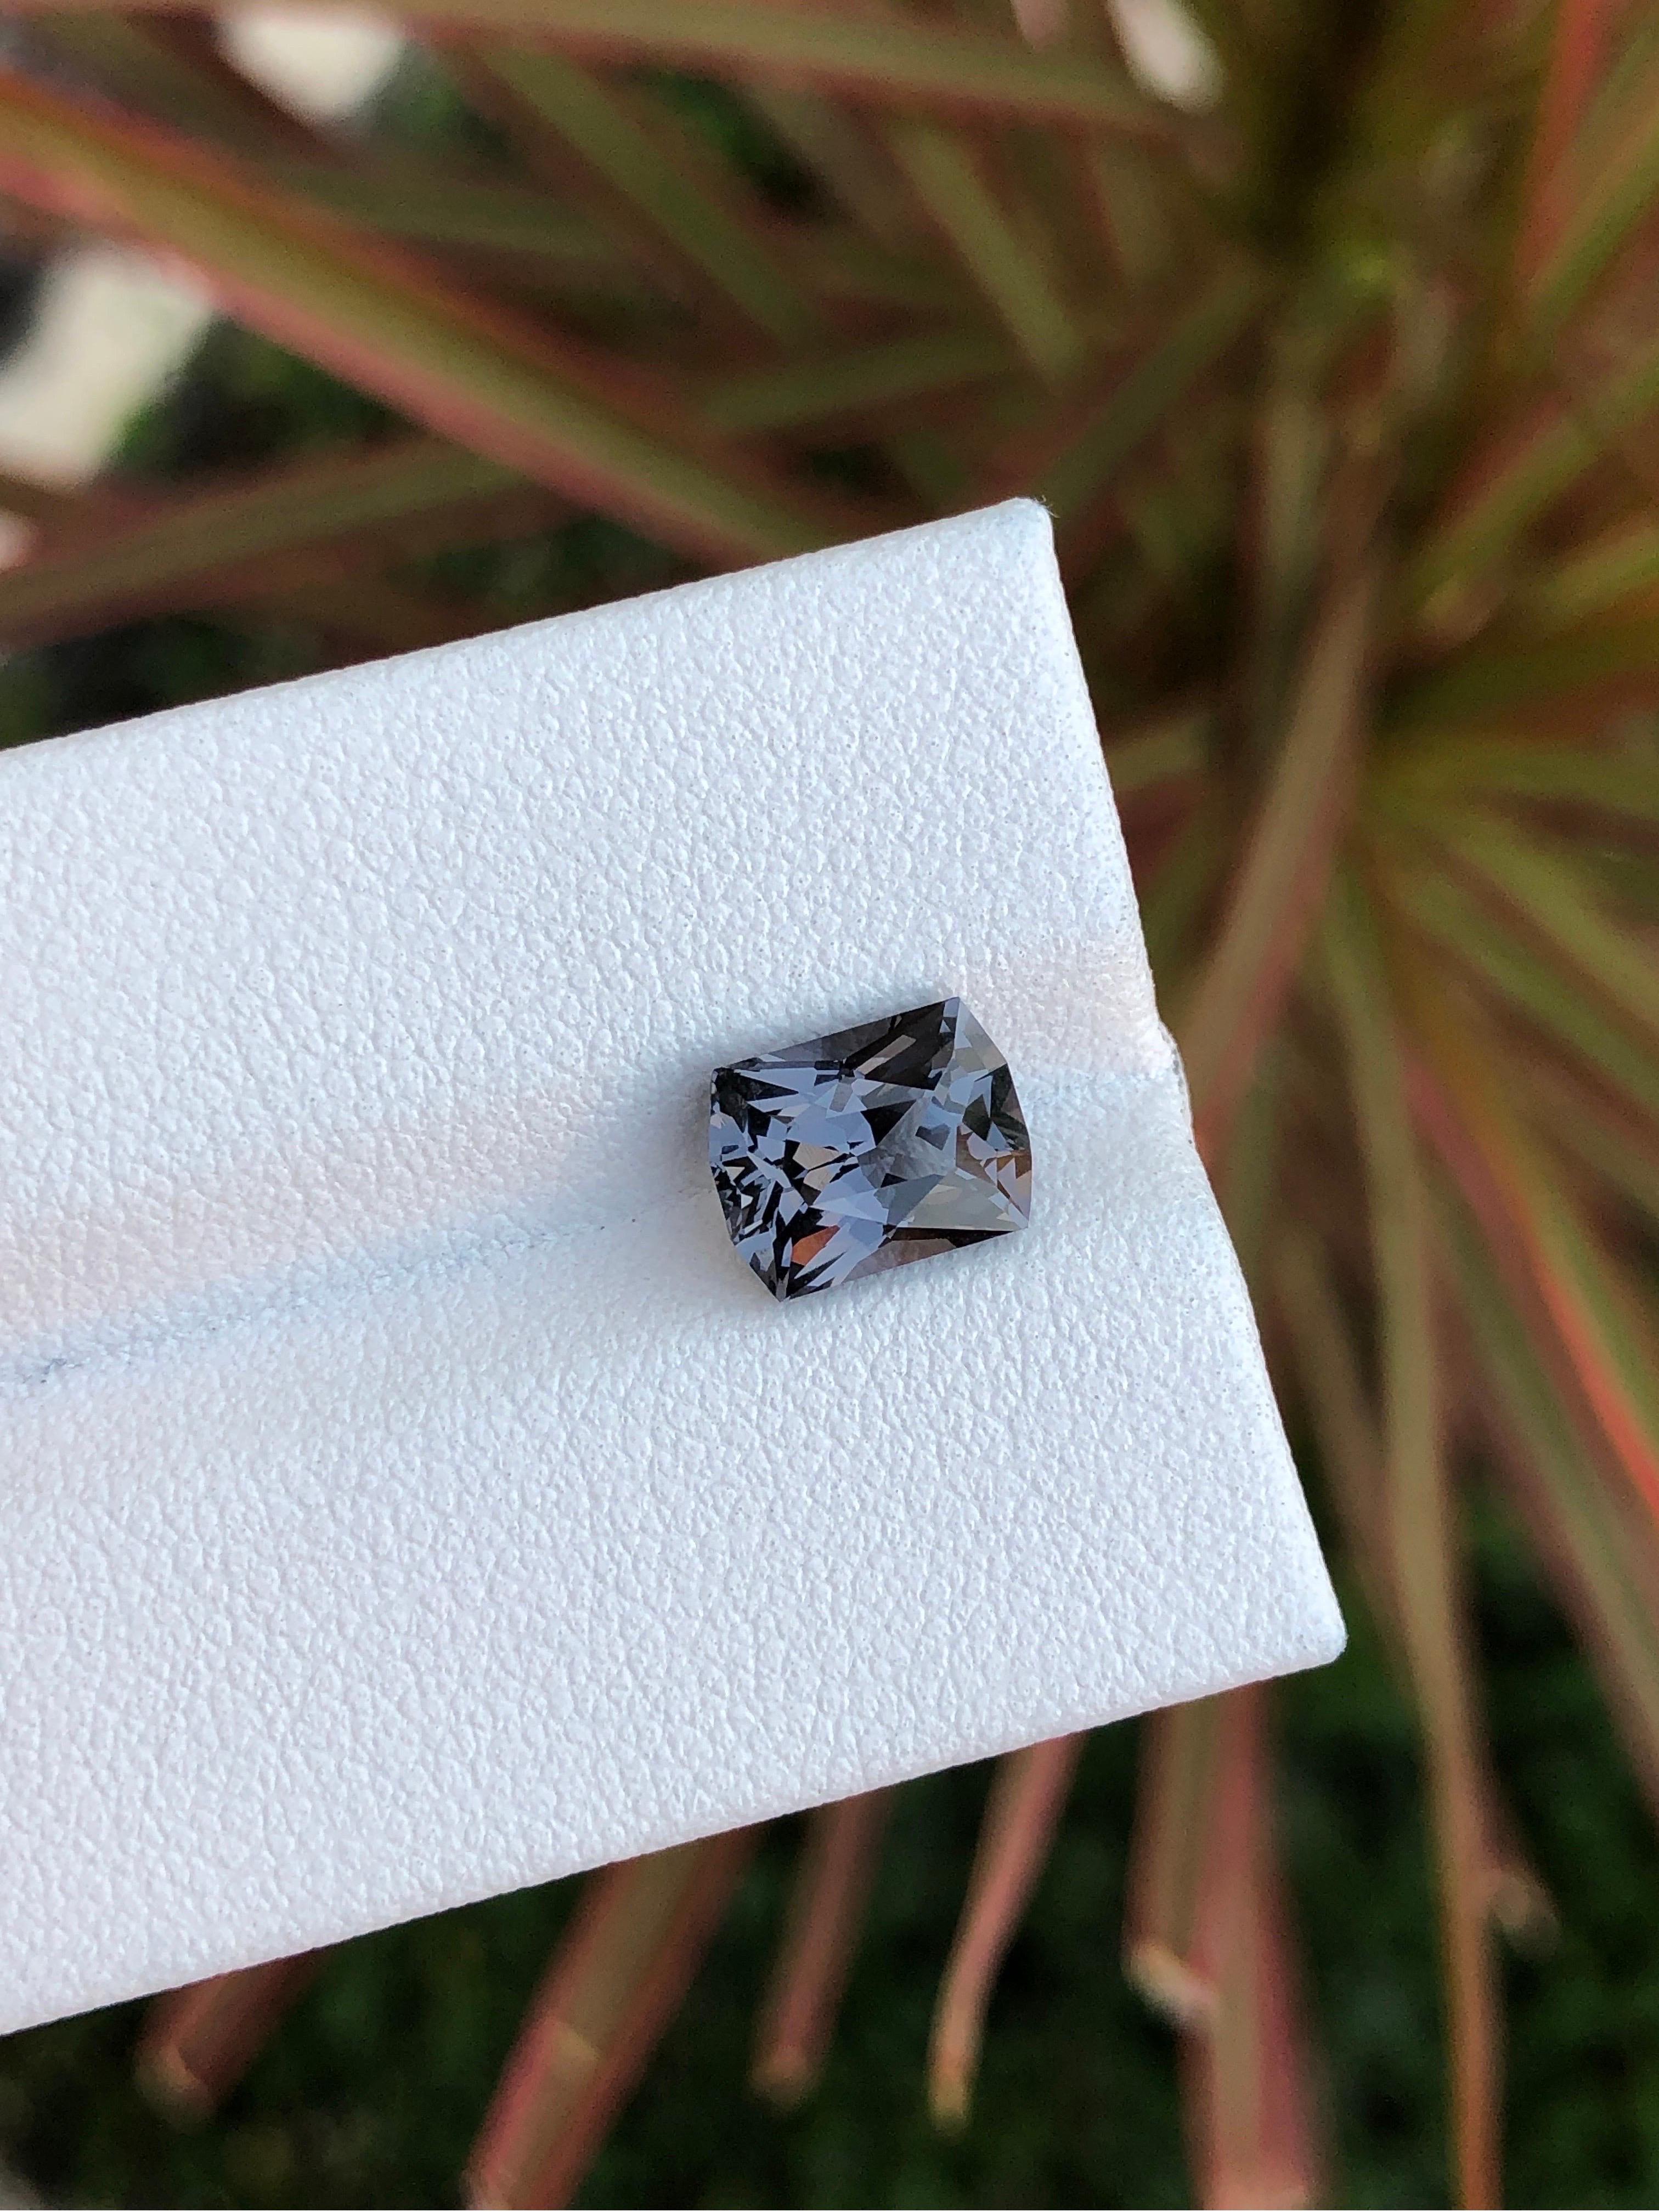 Introducing our exquisite 2.35 ct precision-cut spinel, a radiant gem destined for elegance. Elevate your ring to unparalleled beauty with this stunning centerpiece.
—————————————————————————
Stone💎:Spinel 
Color💈: Grey Burma 
Clarity💧: Loupe